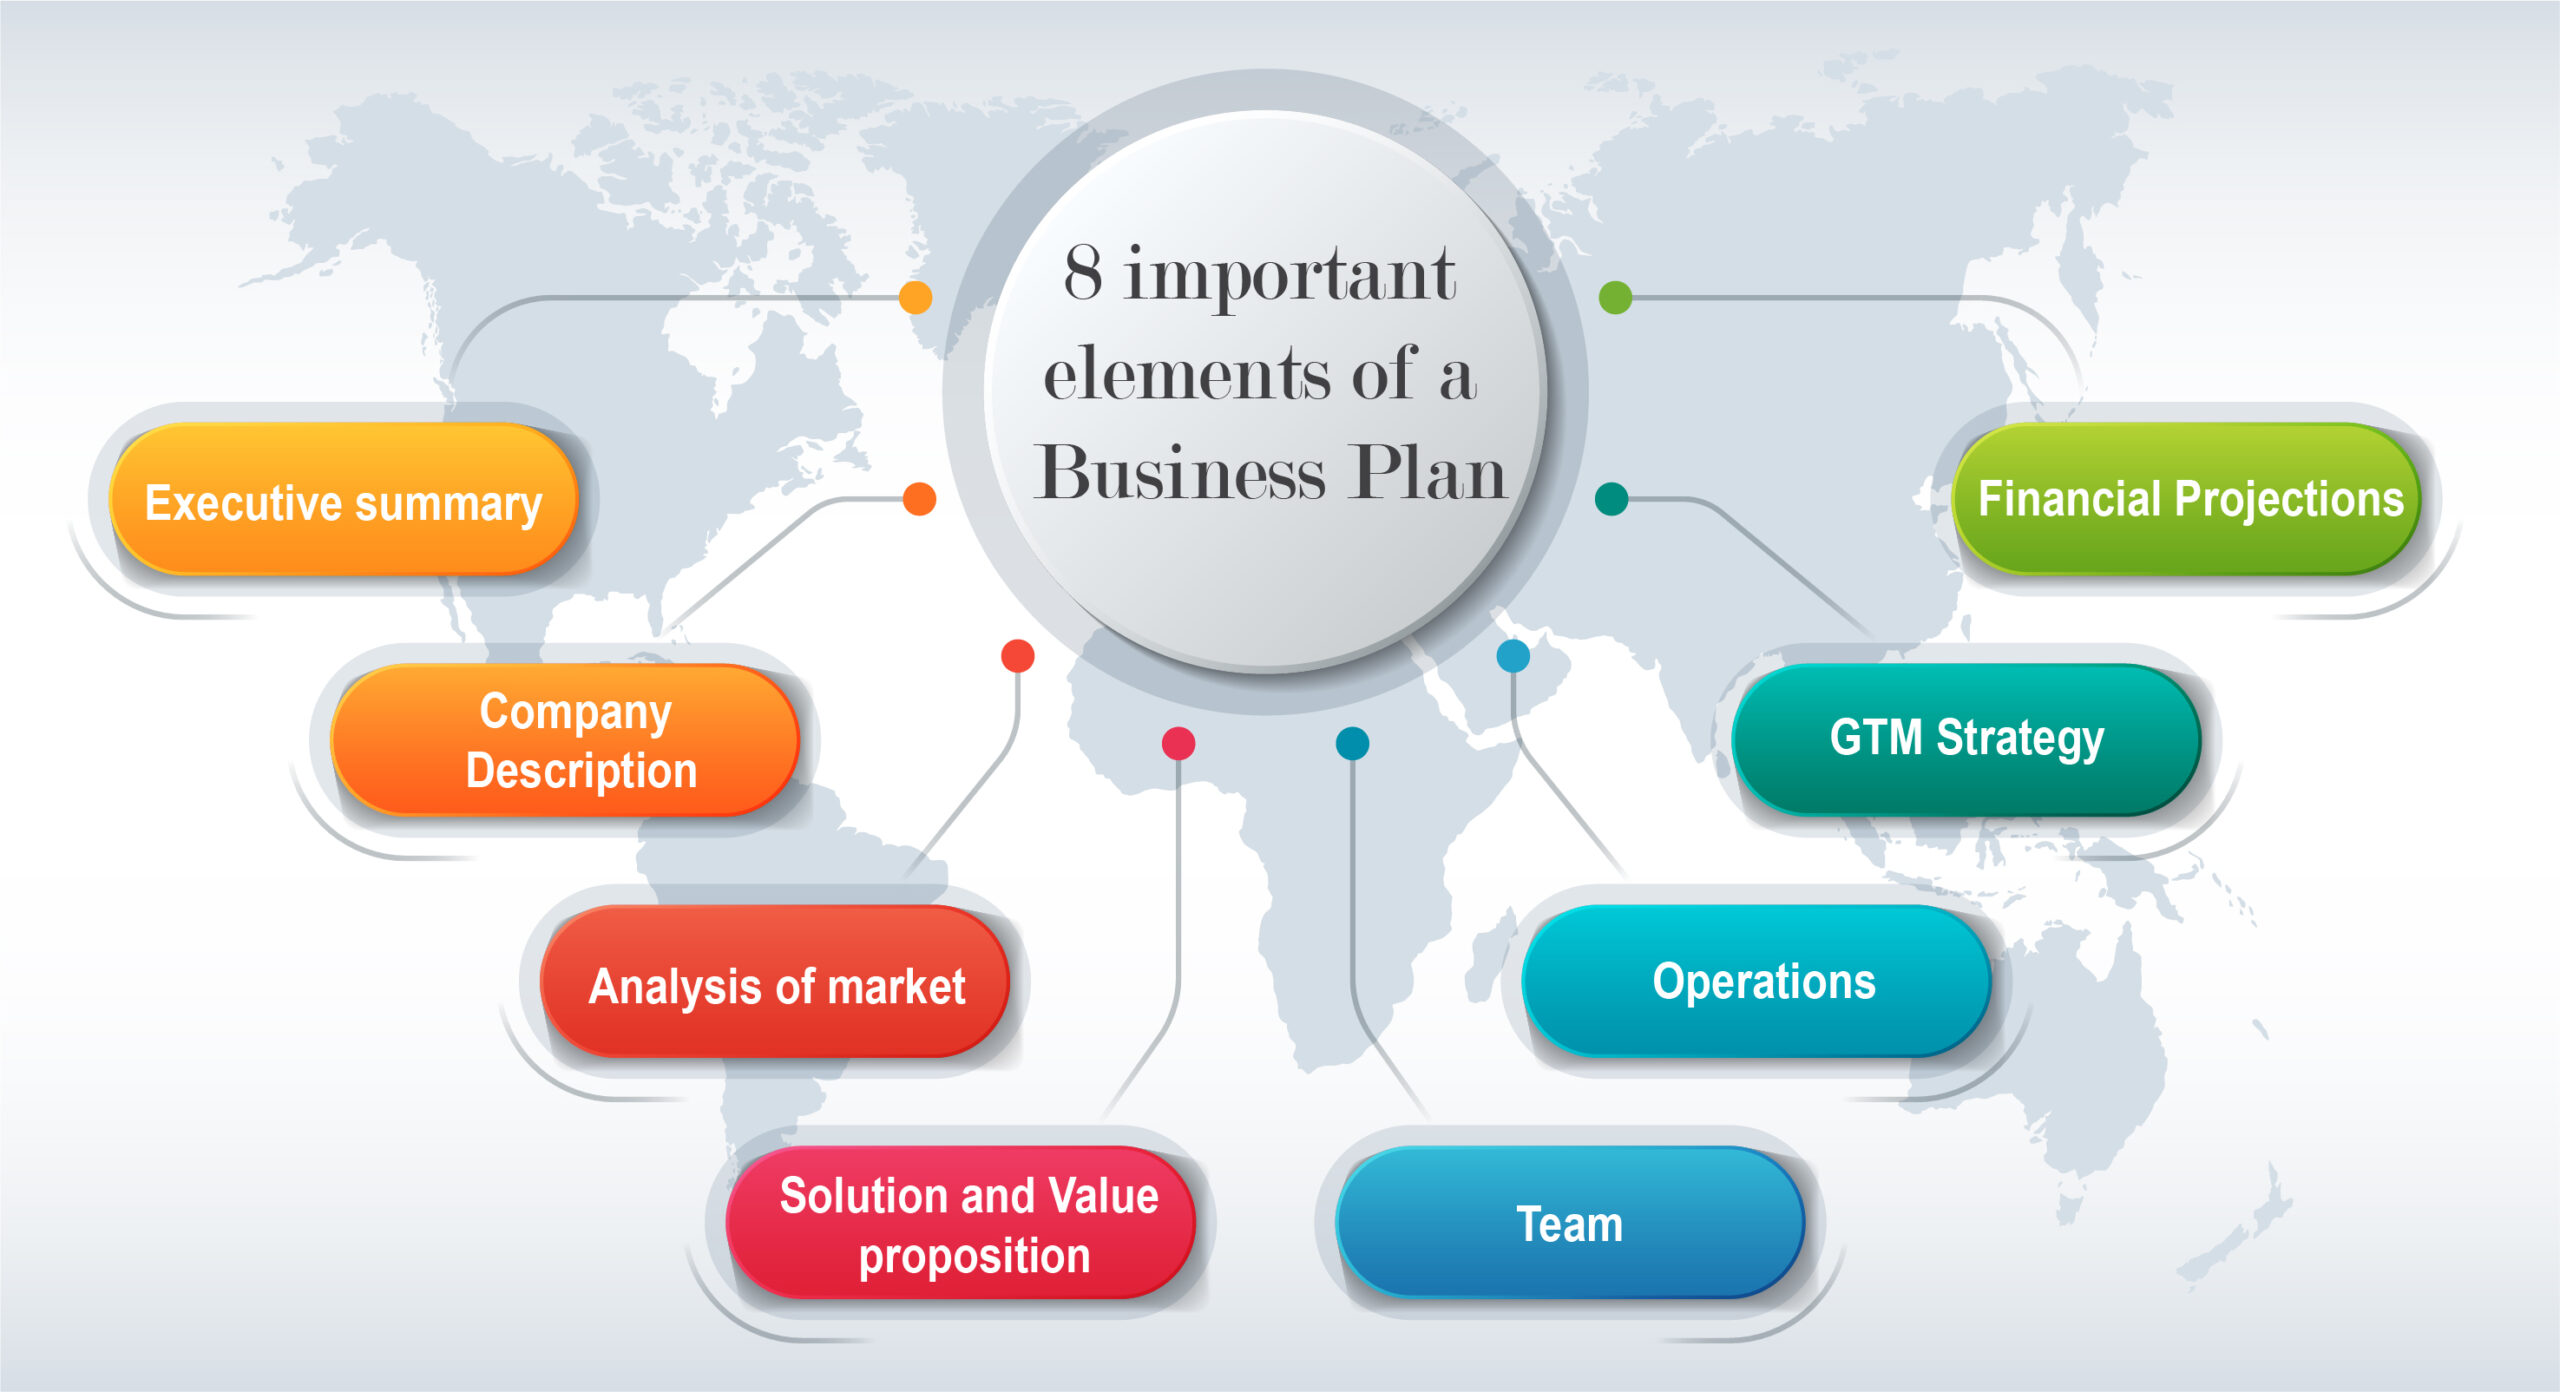 8 important elements of a Business Plan